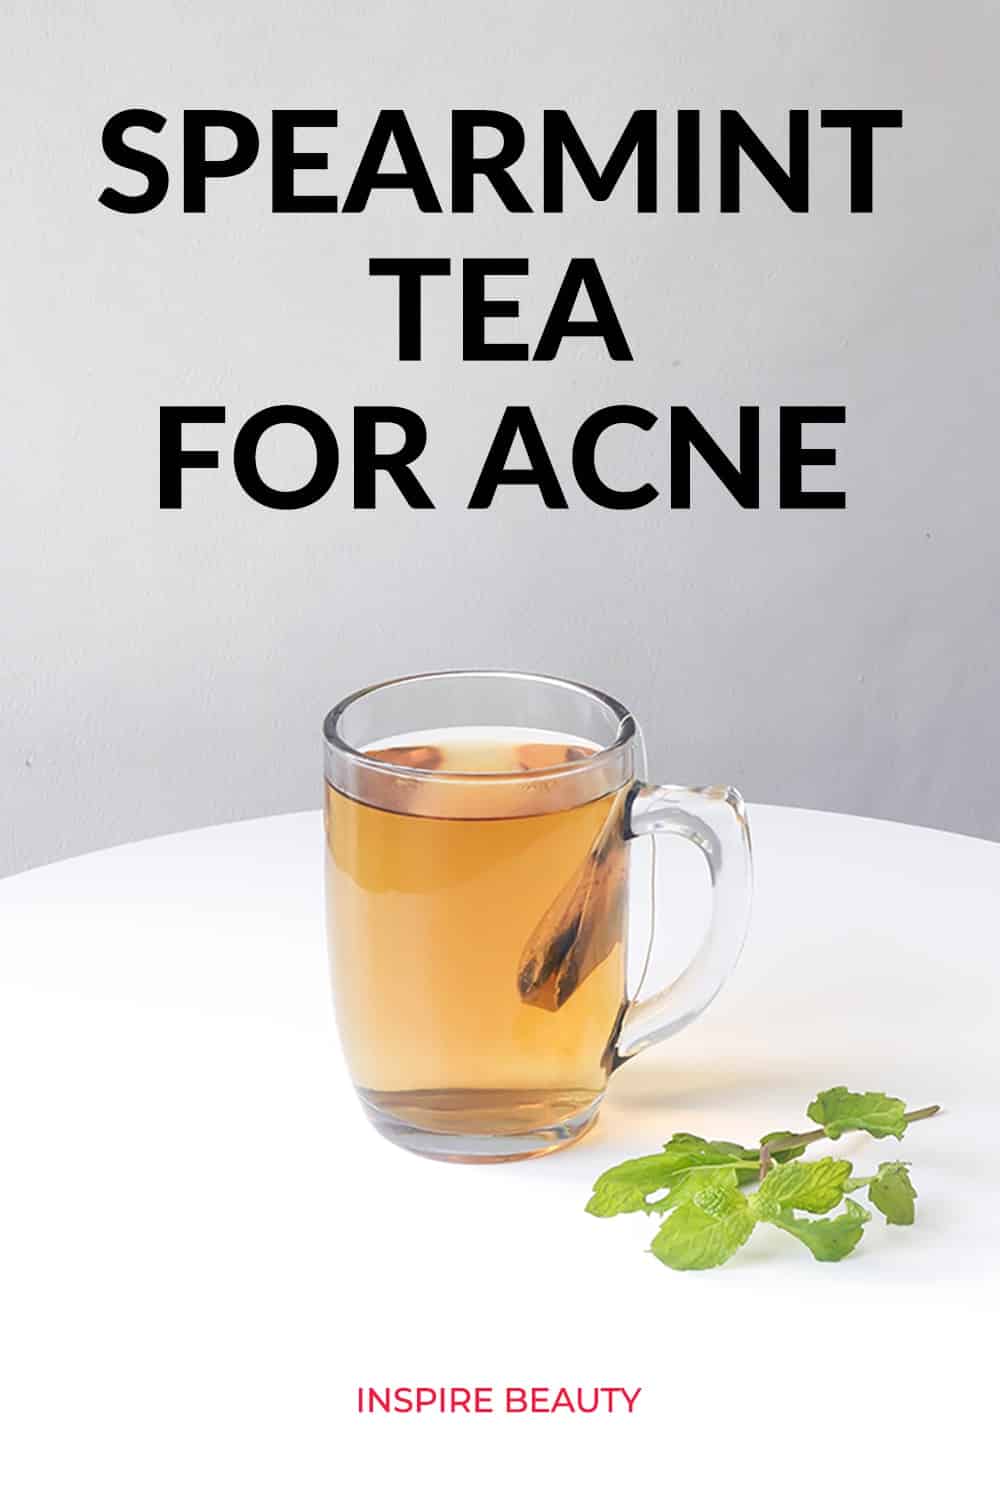 Studies show drinking spearmint tea has an anti-androgen effect helping to balance hormones in women with PCOS, can also help hirsutism and acne